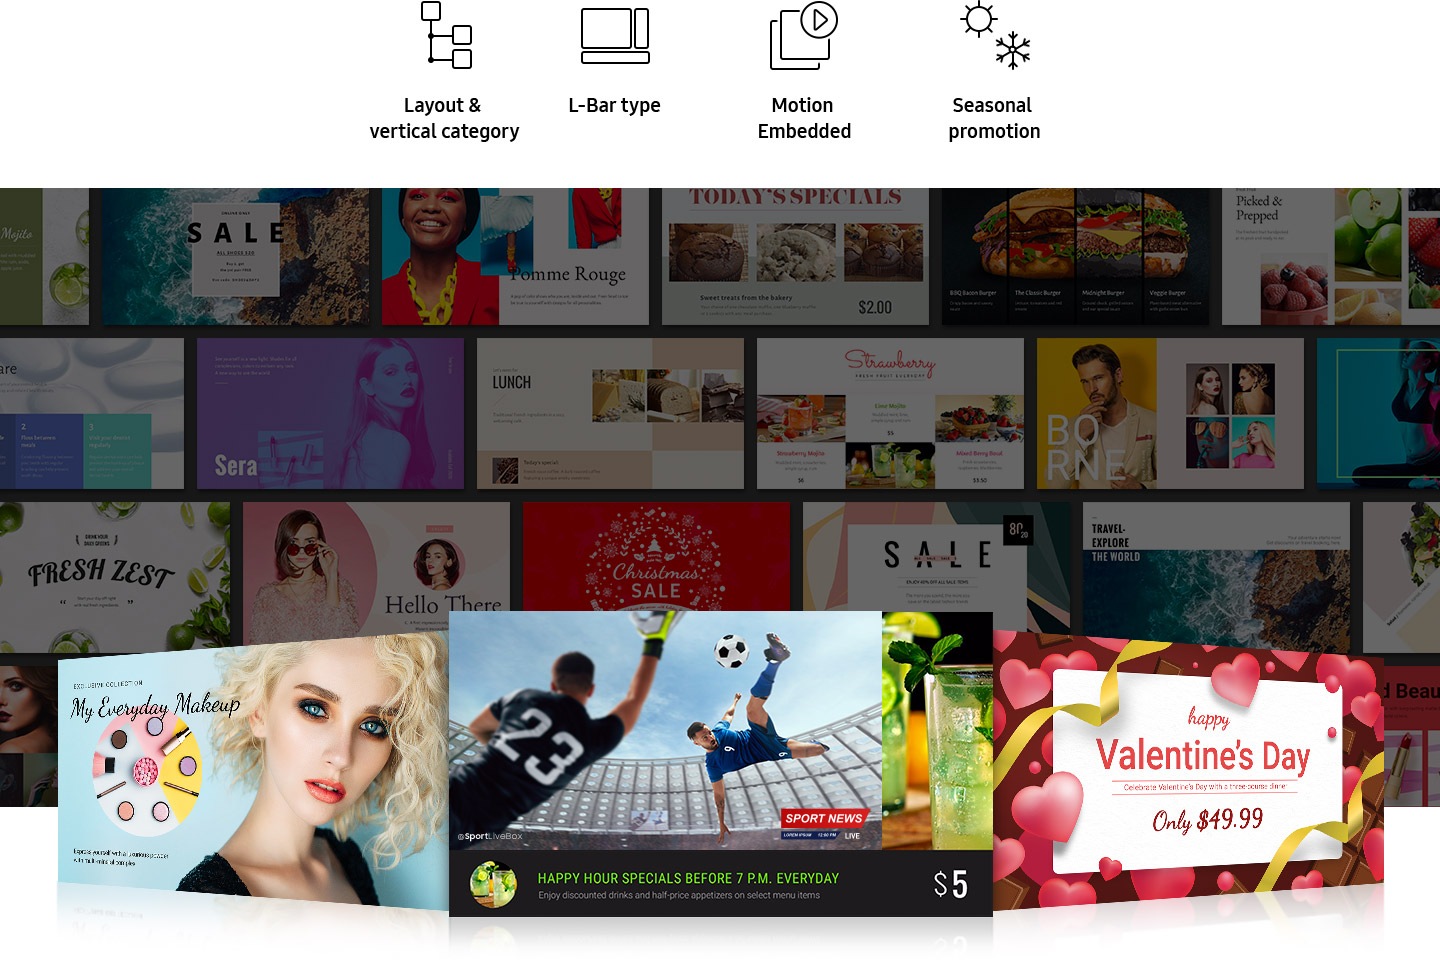 There are various contents such as makeup, football, and Valentine's Day promotions. Above are Layout & vertical category, L-bar type, motion embedded, and seasonal promotion icons.